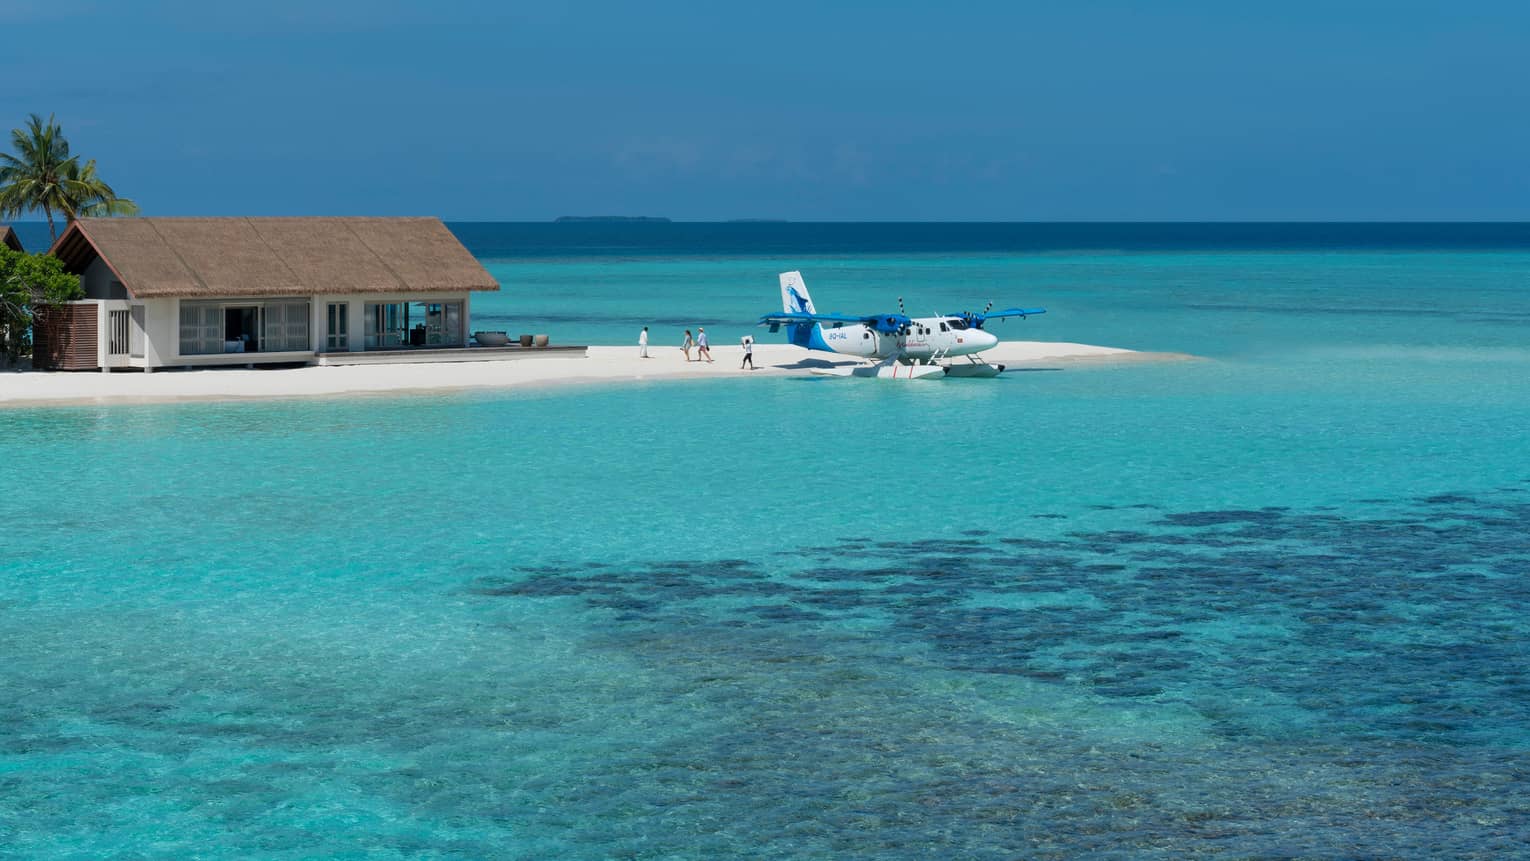 Guests descend from private float plane parked at white sand beach